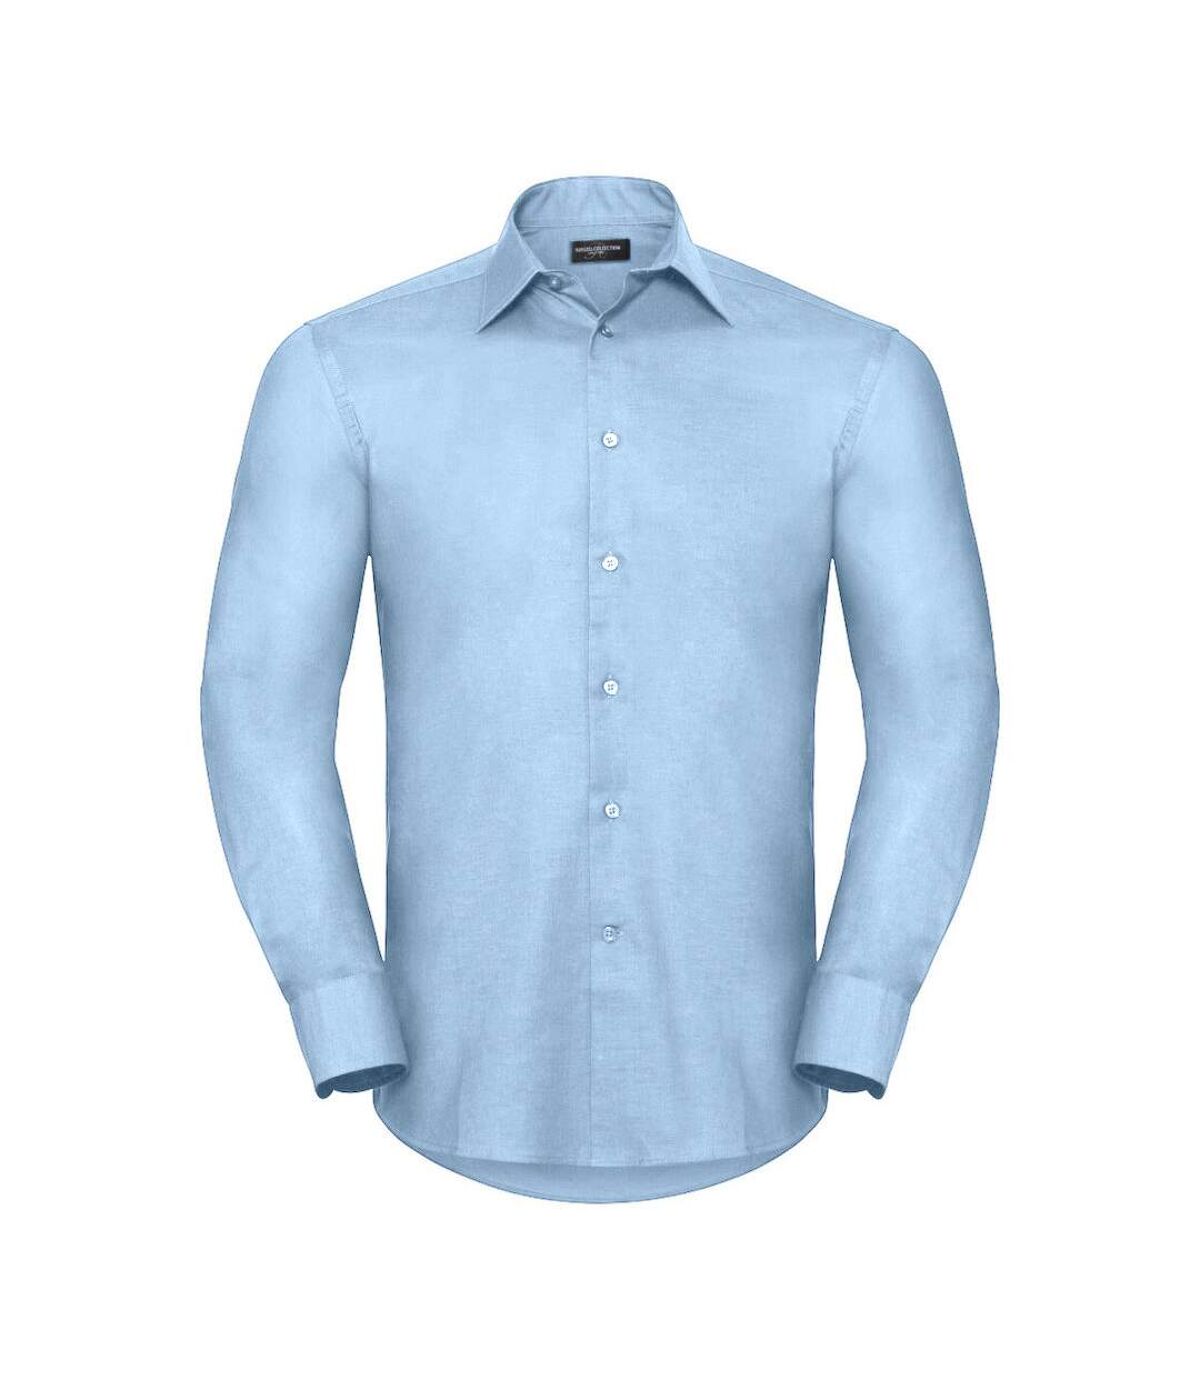 Russell - Chemise manches longues - Homme (Bleu roi) - UTBC1015